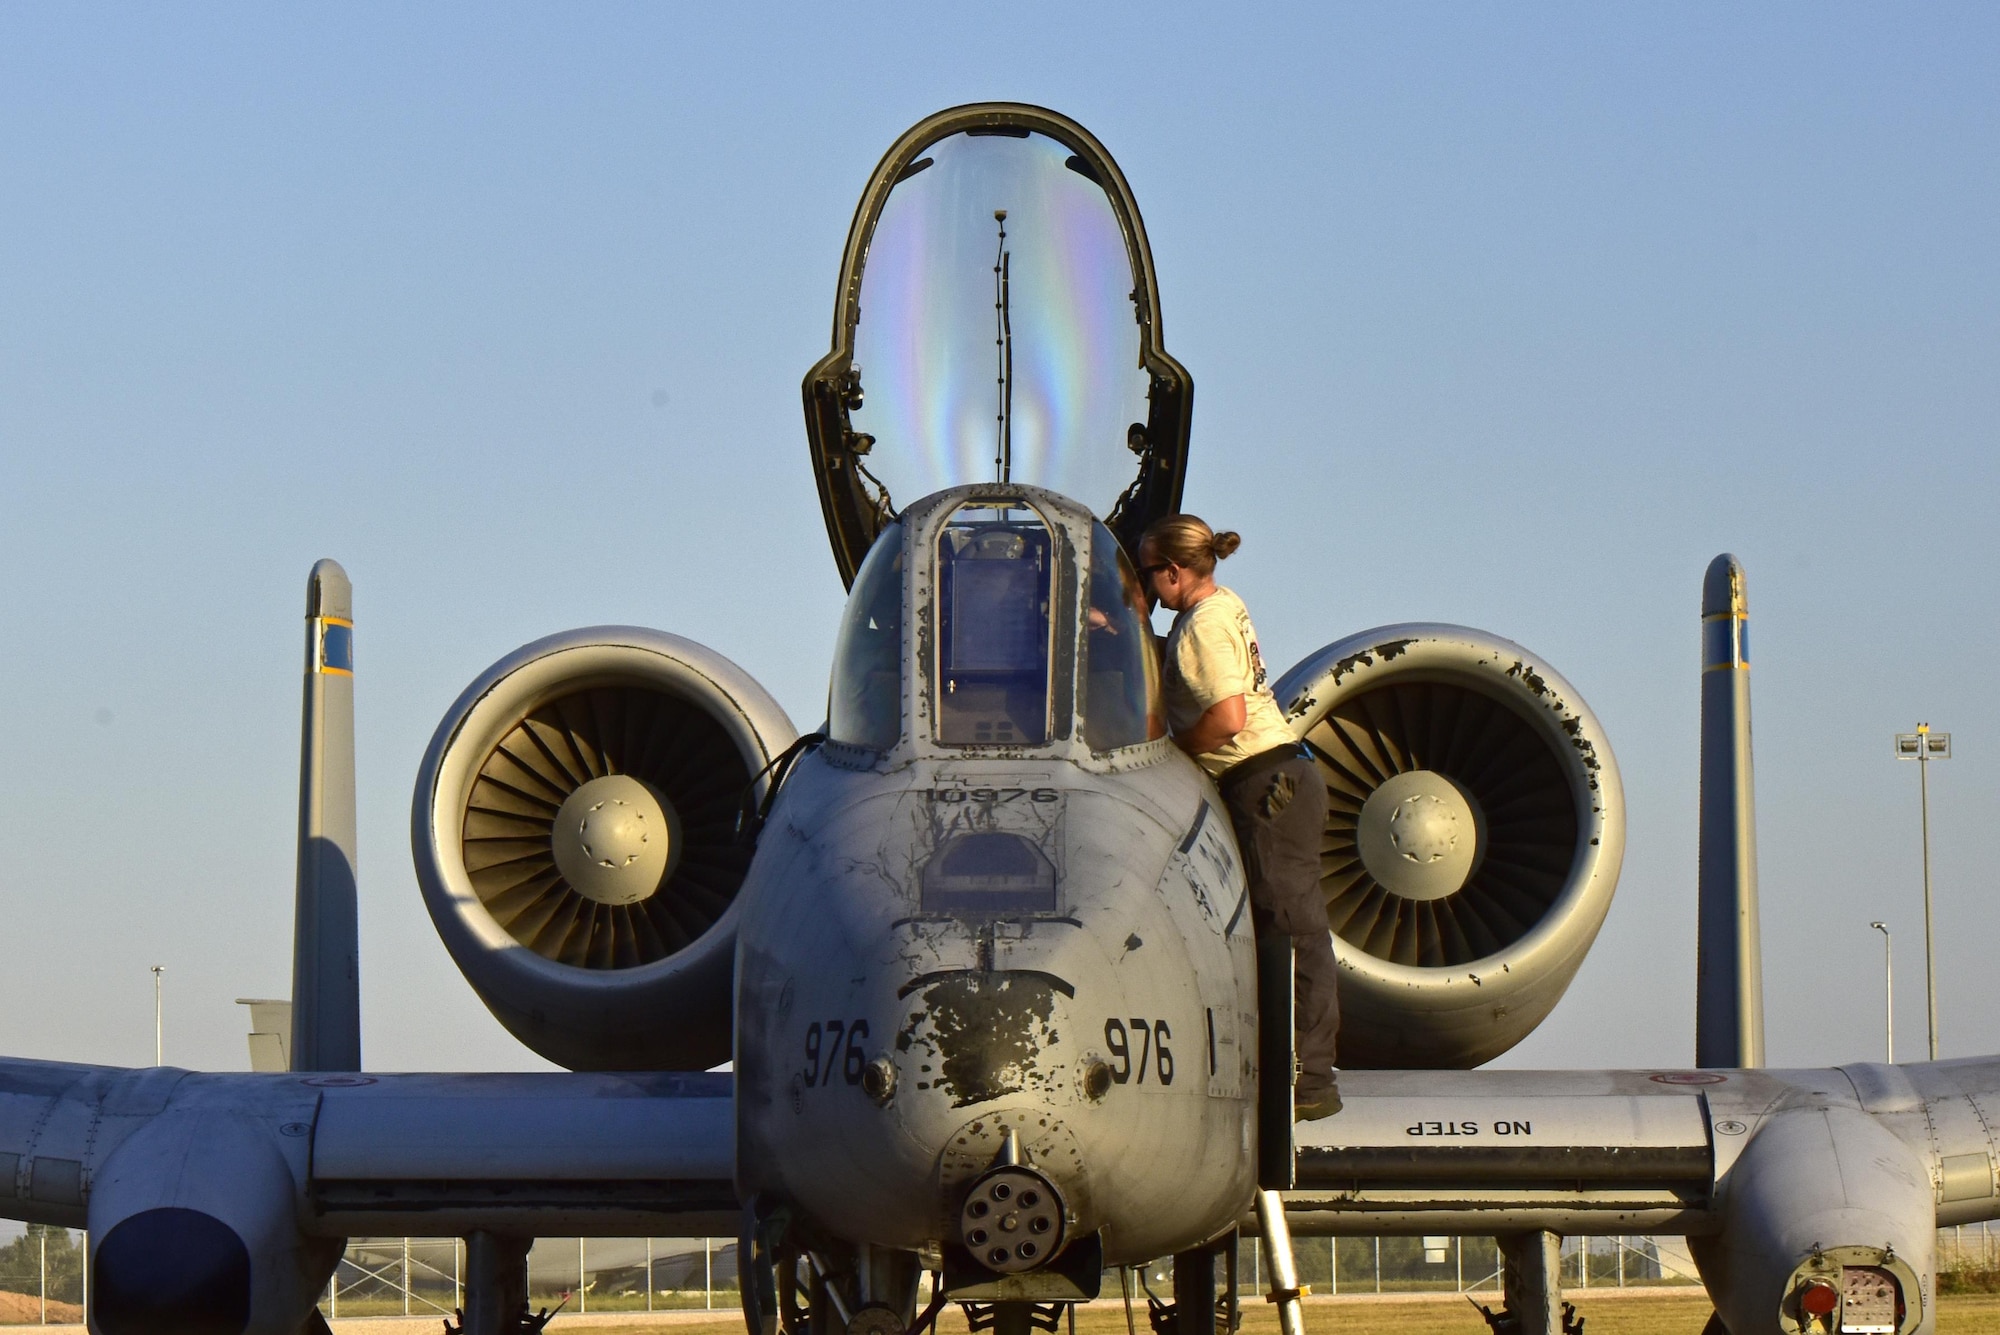 A maintainer from the 447th Expeditionary Aircraft Maintenance Squadron prepares Lt. Col. Ben Rudolphi, 407th Expeditionary Operation Support Squadron commander, for flight in an A-10 Thunderbolt II July 11, 2017, at Incirlik Air Base, Turkey.  Rudolphi has provided a dual role in Operation INHERENT RESOLVE as the commander of the 407th EOSS in Southwest Asia and being directly in the fight against ISIS conducting A-10 flying missions with the 447th Air Expeditionary Group.The A-10 supports ground forces with rapid employment close air and contact support. It utilizes a variety of bomb, missiles and a 30mm GAU-8 seven-barrel Gatling gun. (U.S. Air Force photo by Senior Airman Ramon A. Adelan)